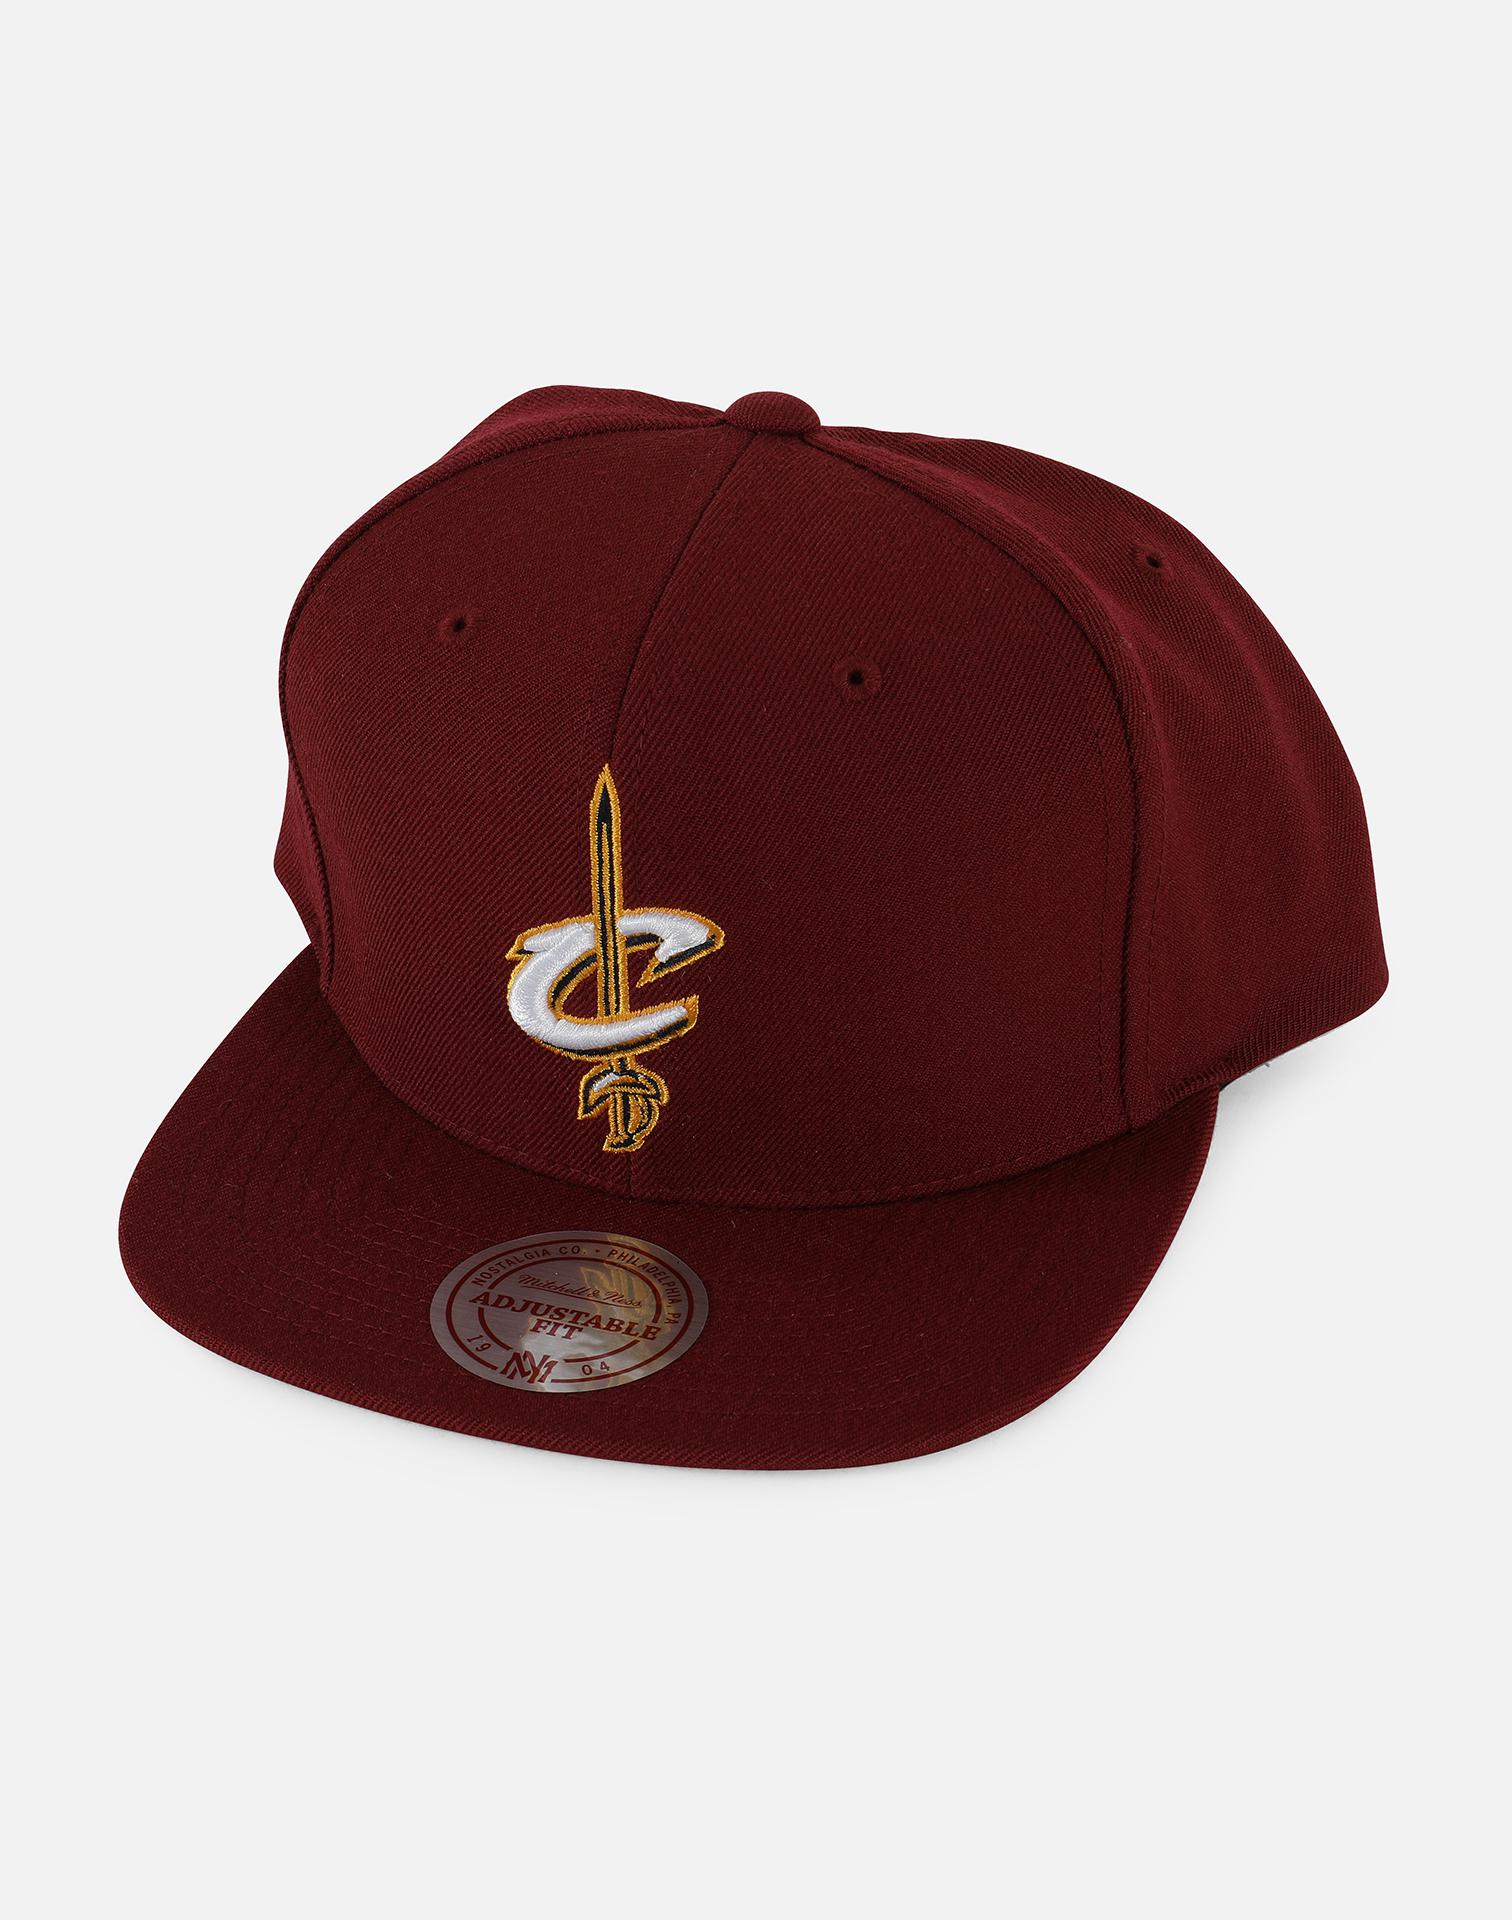 Mitchell & Ness Nba Cleveland Cavaliers Basic Logo Snapback Hat in ...